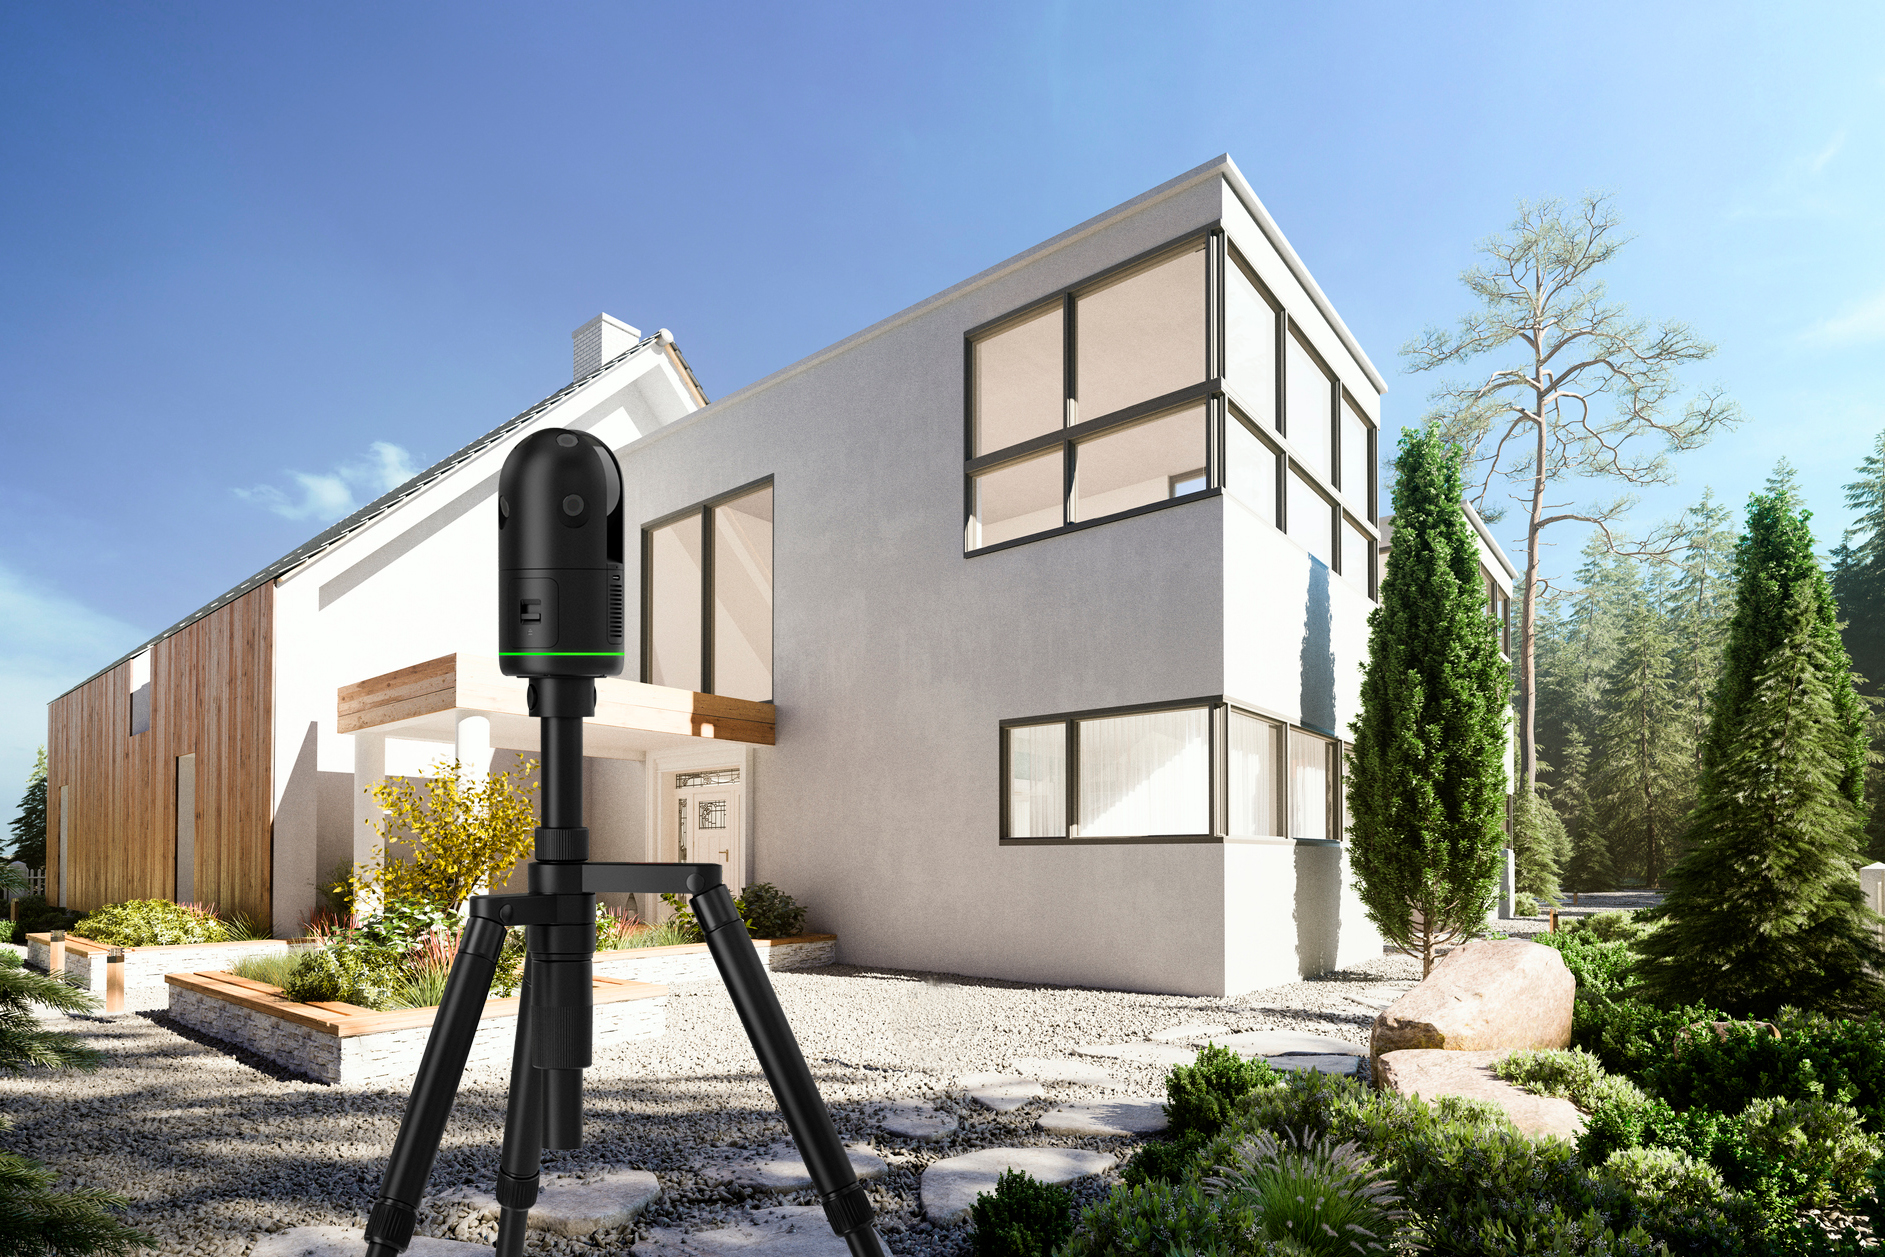 BLK360 in front of a modern home